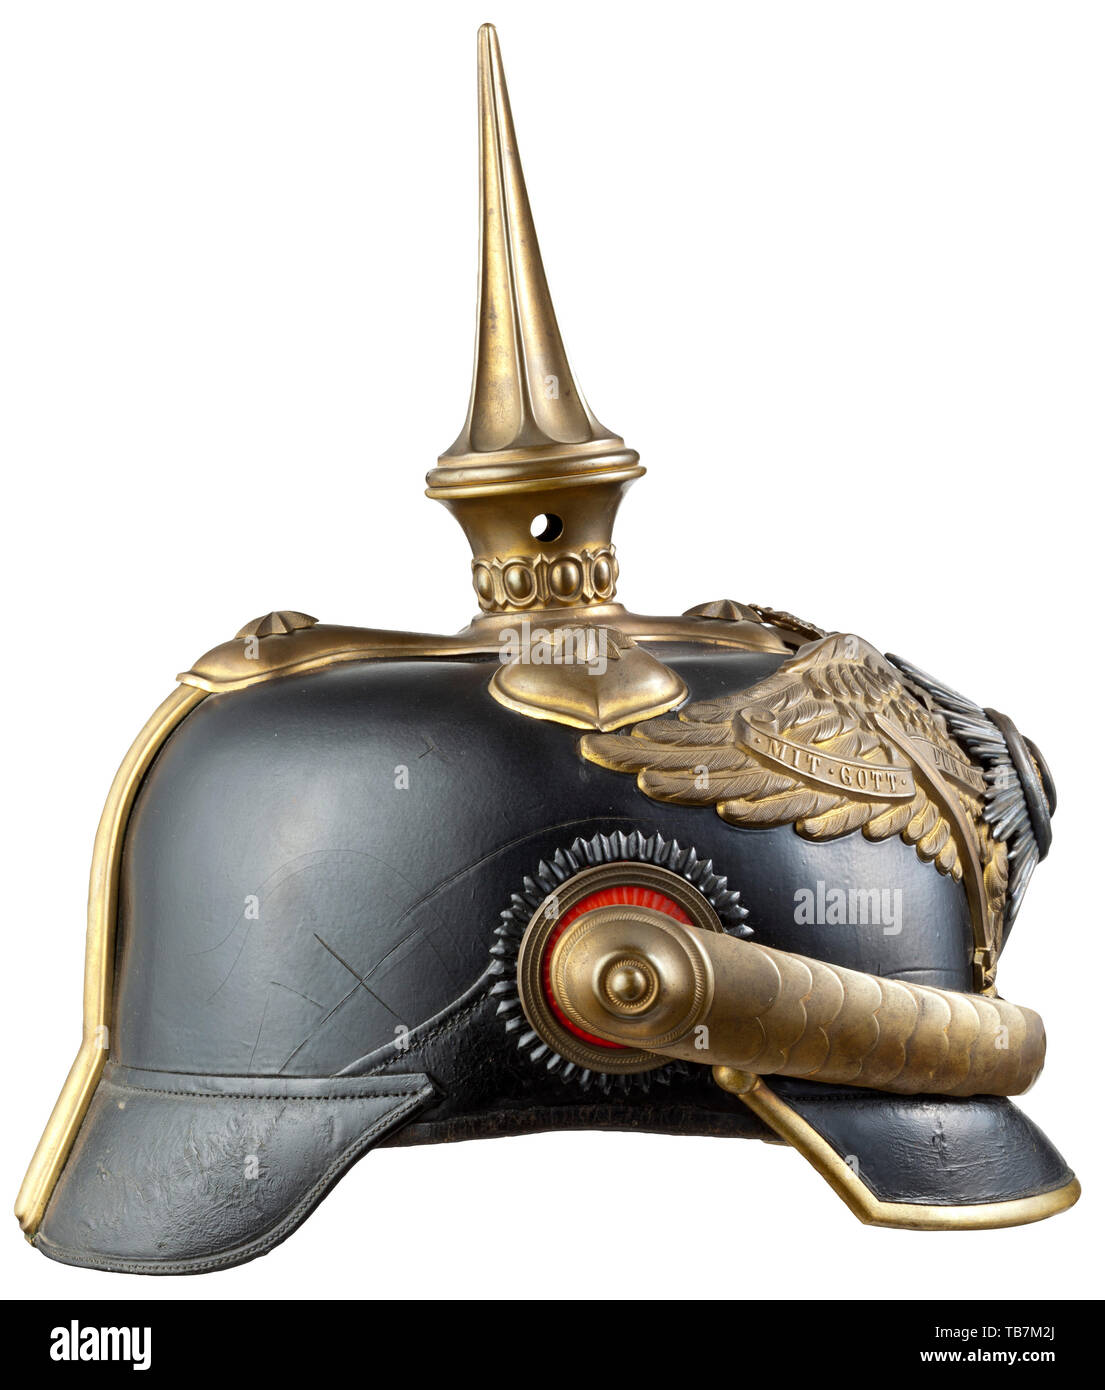 A helmet M 1871/97 for generals, Leather body (crazed, slightly sunken) with guard eagle and enamelled guard star which bears the motto 'Suum Cuique' and the black Hohenzollern eagle on a gold background. All brass fittings with darkened gilding, the cruciform base with beaded band mount, unscrewable spike with sixfold fluting, 22 mm star screws. Angular front visor, convex chain-linked chin scales, leather strap with eyelet, officer's cockades, smooth back spline without ventilation, the green and red underlay on front and rear visor with heavy warpage. Rep silk liner miss, Editorial-Use-Only Stock Photo